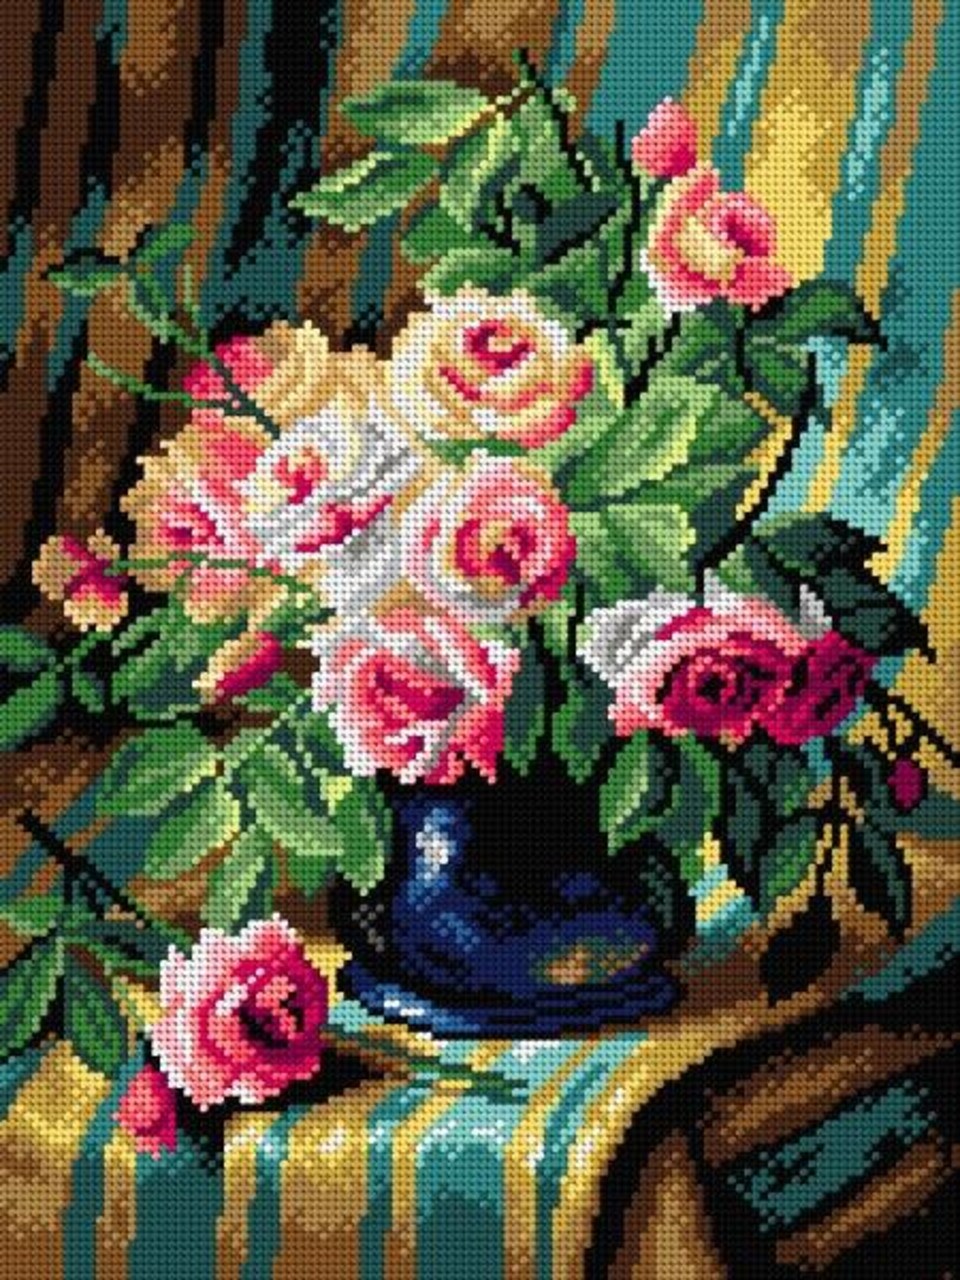 Needlepoint canvas for halfstitch without yarn after Frans Mortelmans -  Still Life with Pink Roses 2899J - Printed Tapestry Canvas